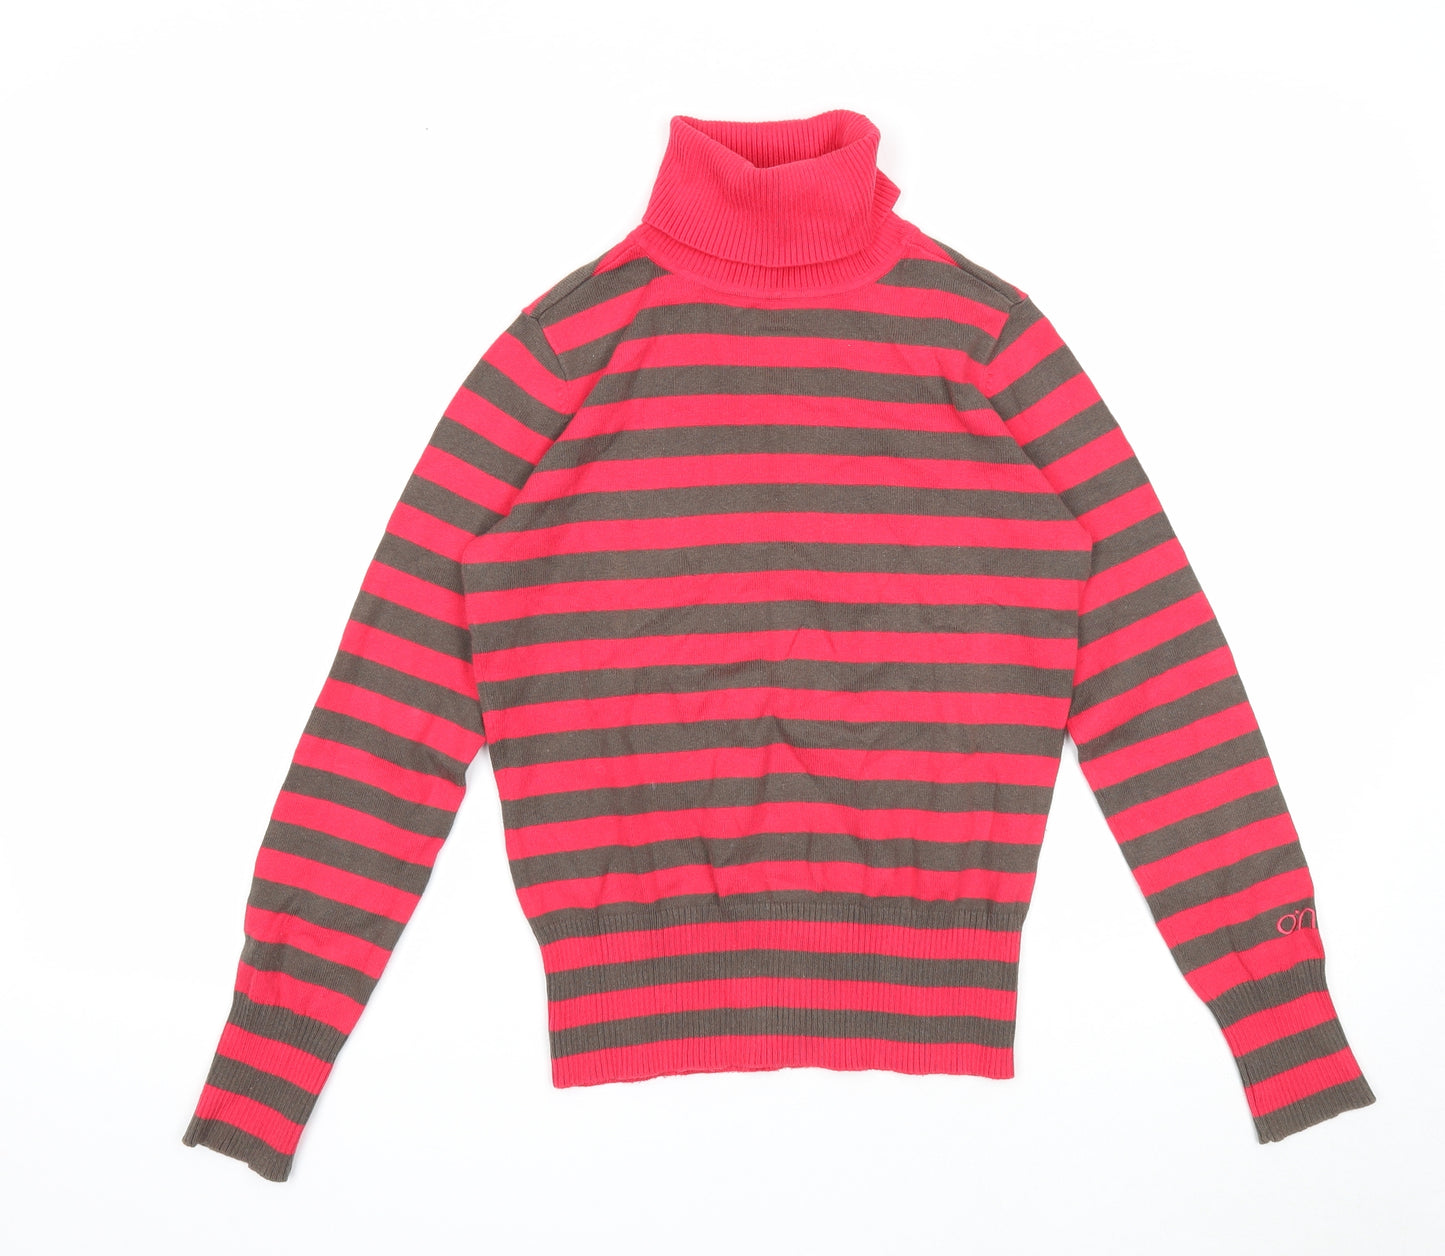 O'Neill Womens Pink Roll Neck Striped Cotton Pullover Jumper Size S